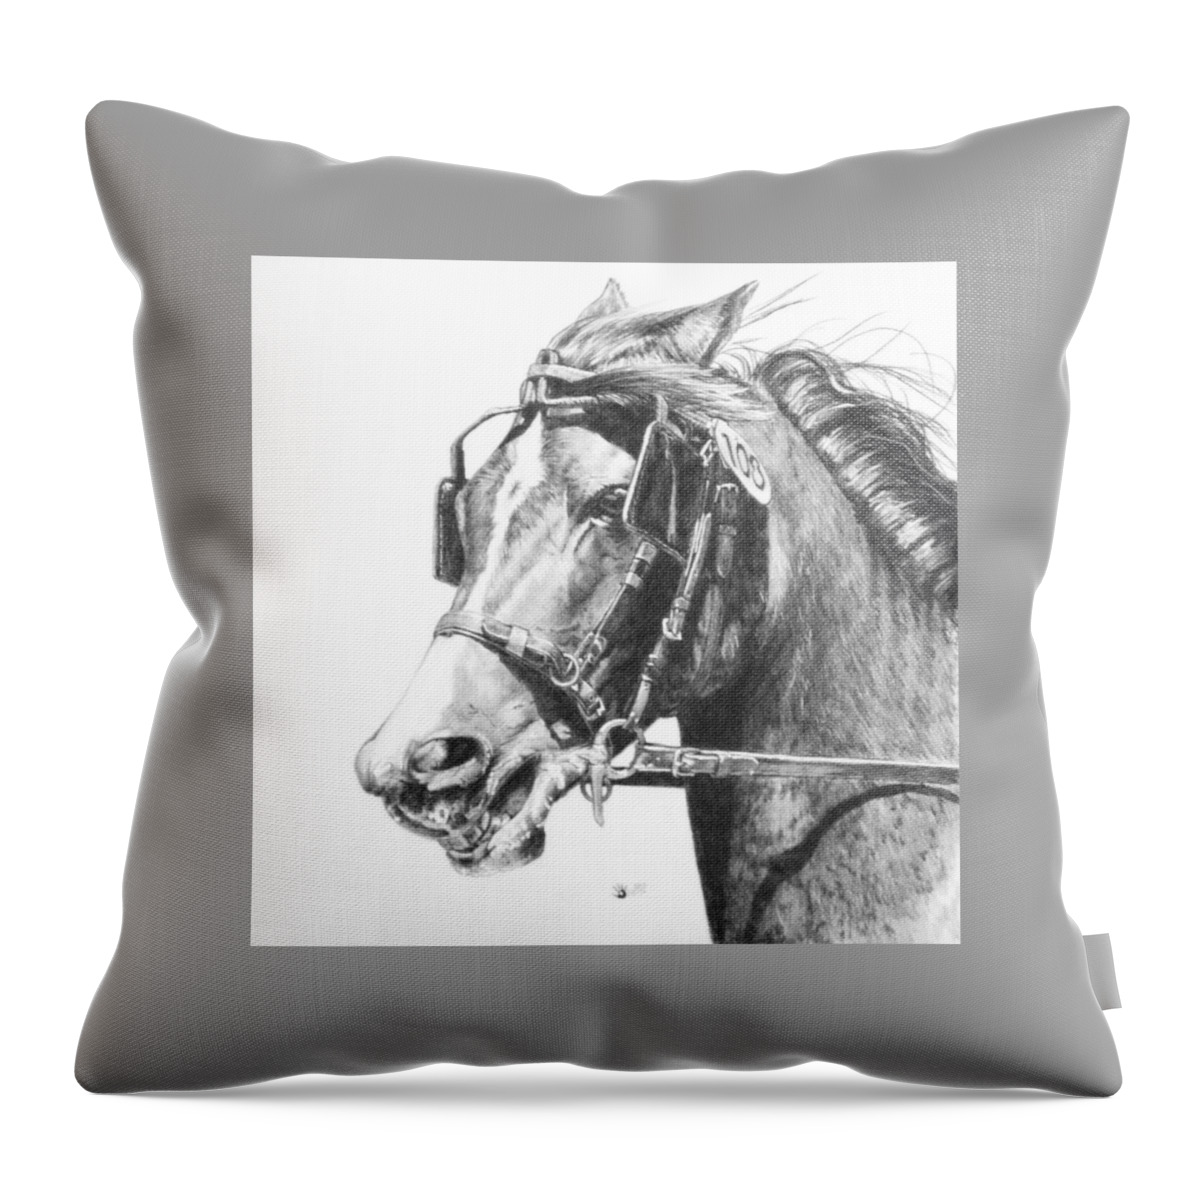 Horse Throw Pillow featuring the drawing Exertion by Barbara Keith